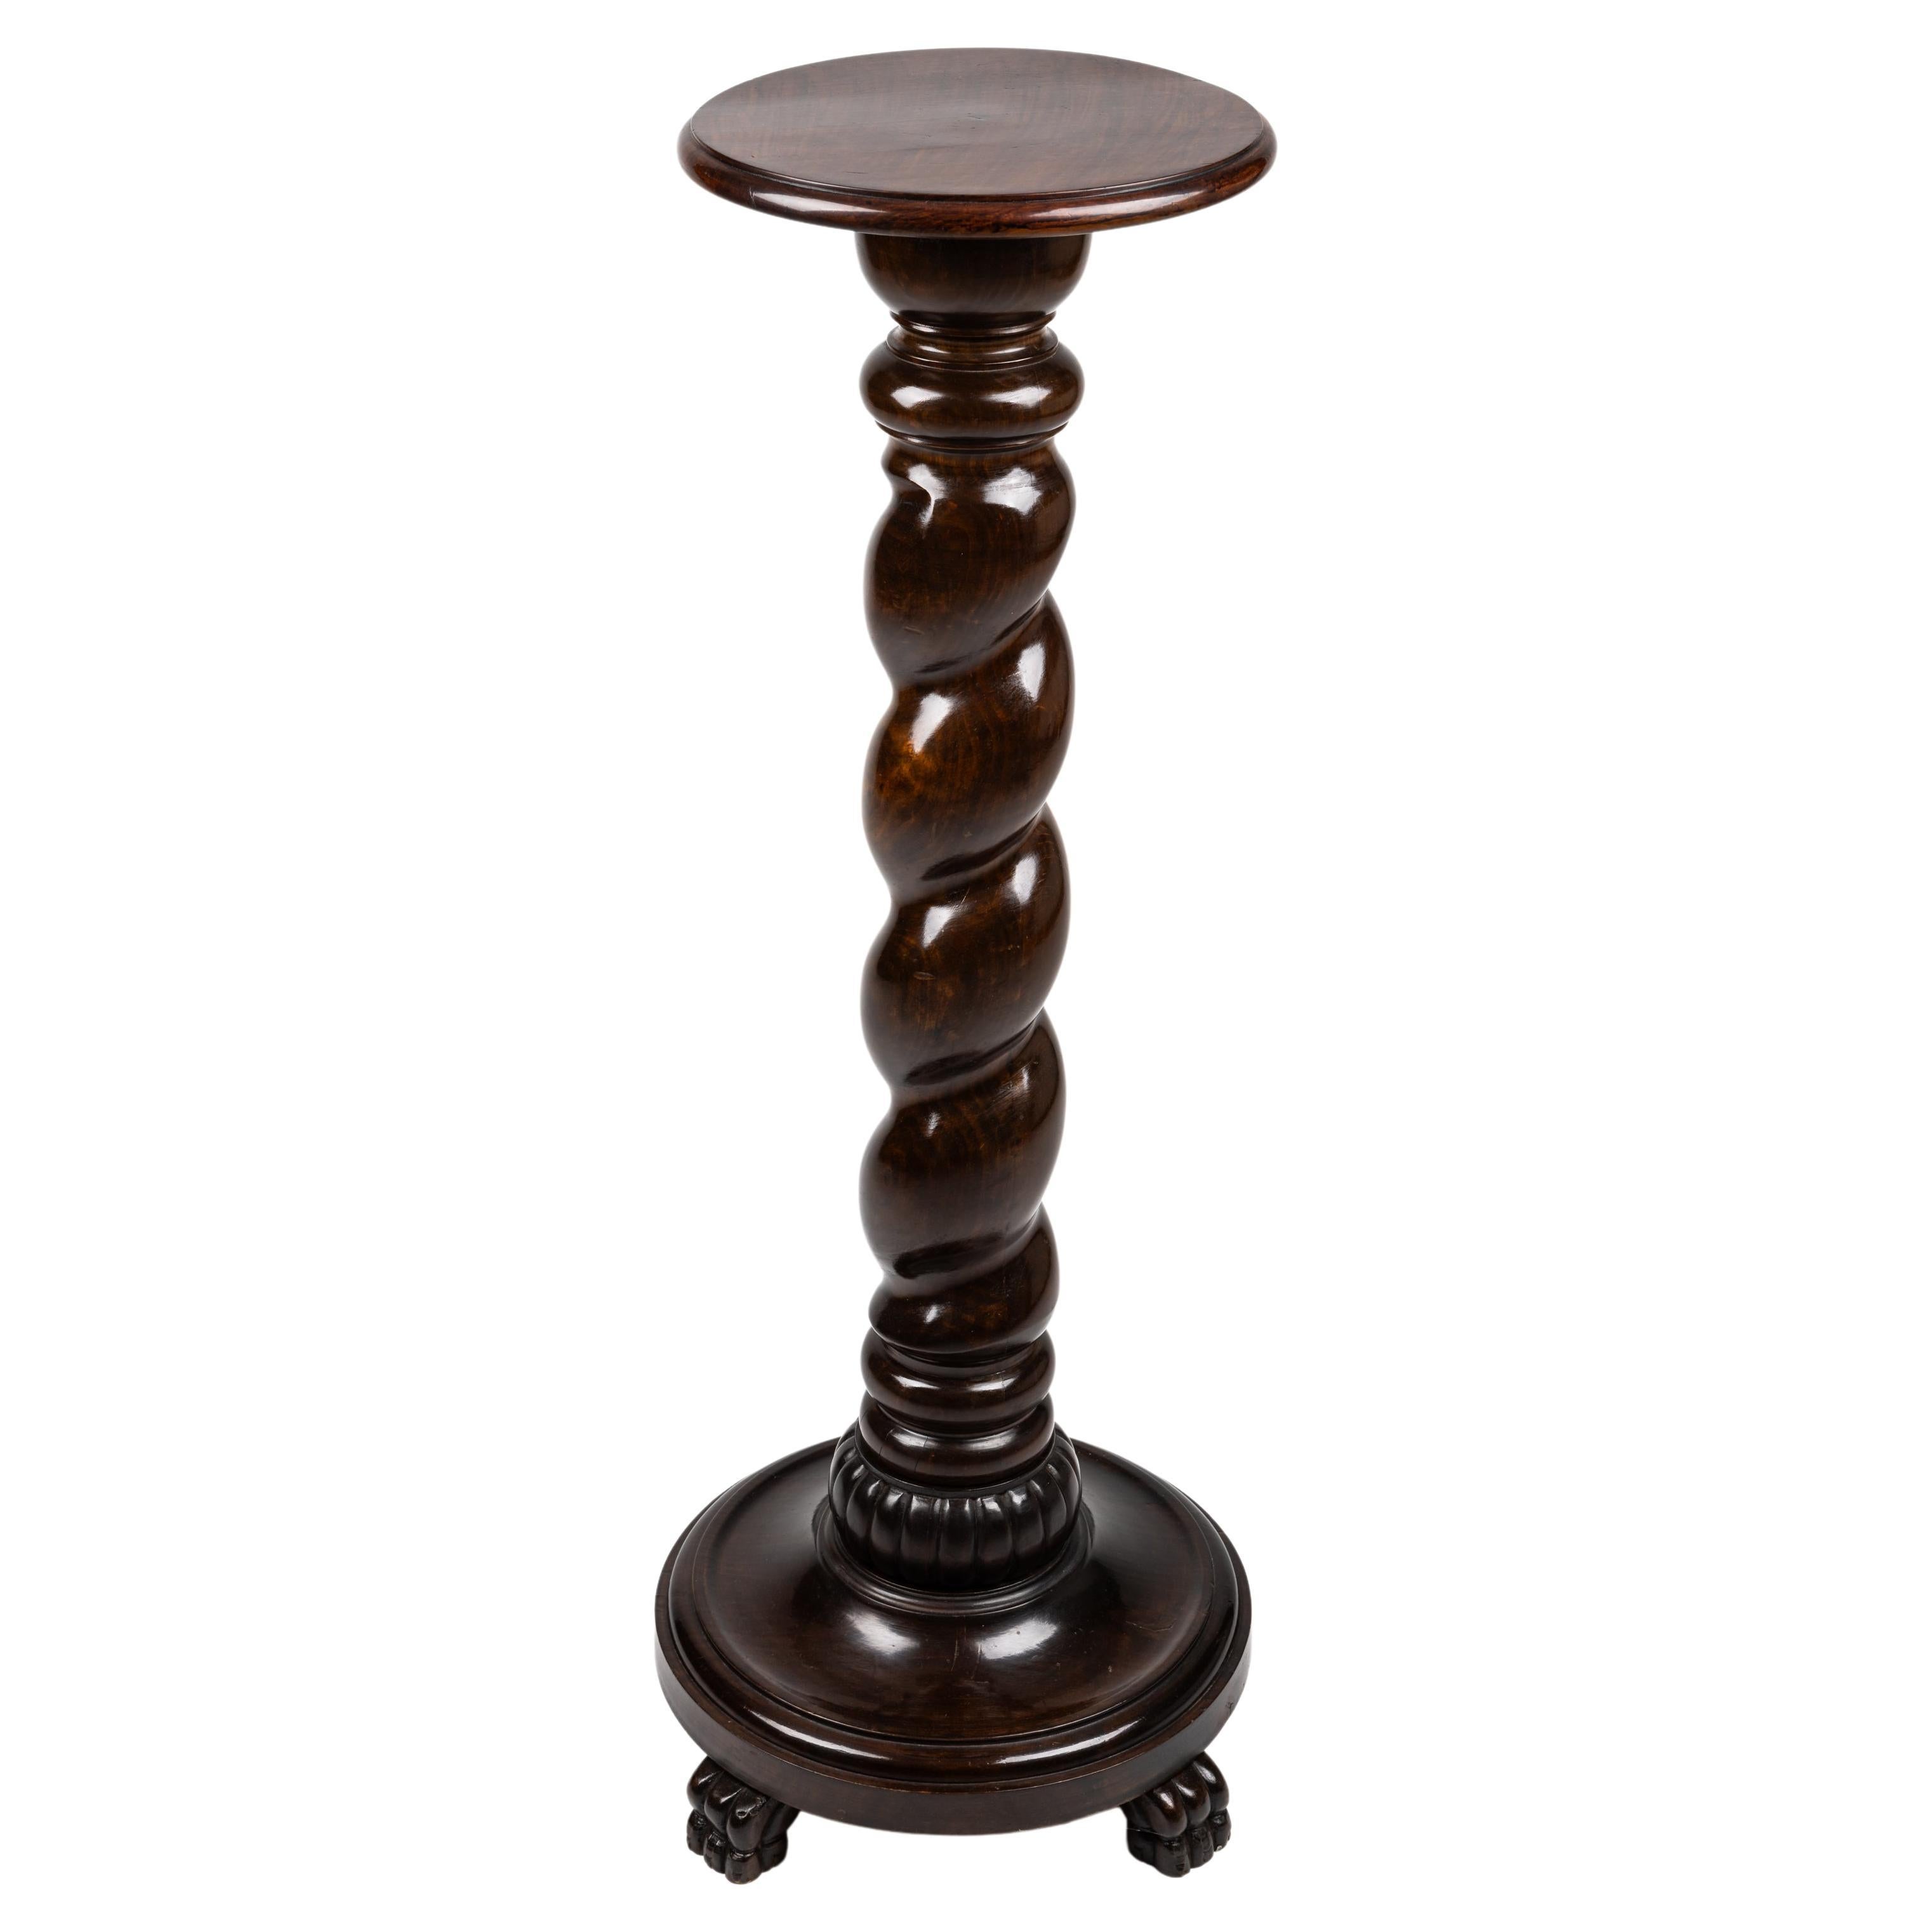 Very special pedestal, made in the late 19. century, around 1880 in Austria. 

This column has a particularly beautiful structure, the base is formed by lion paws around a round, bulbous slab that descends into an impressive, beautifully hand-carved